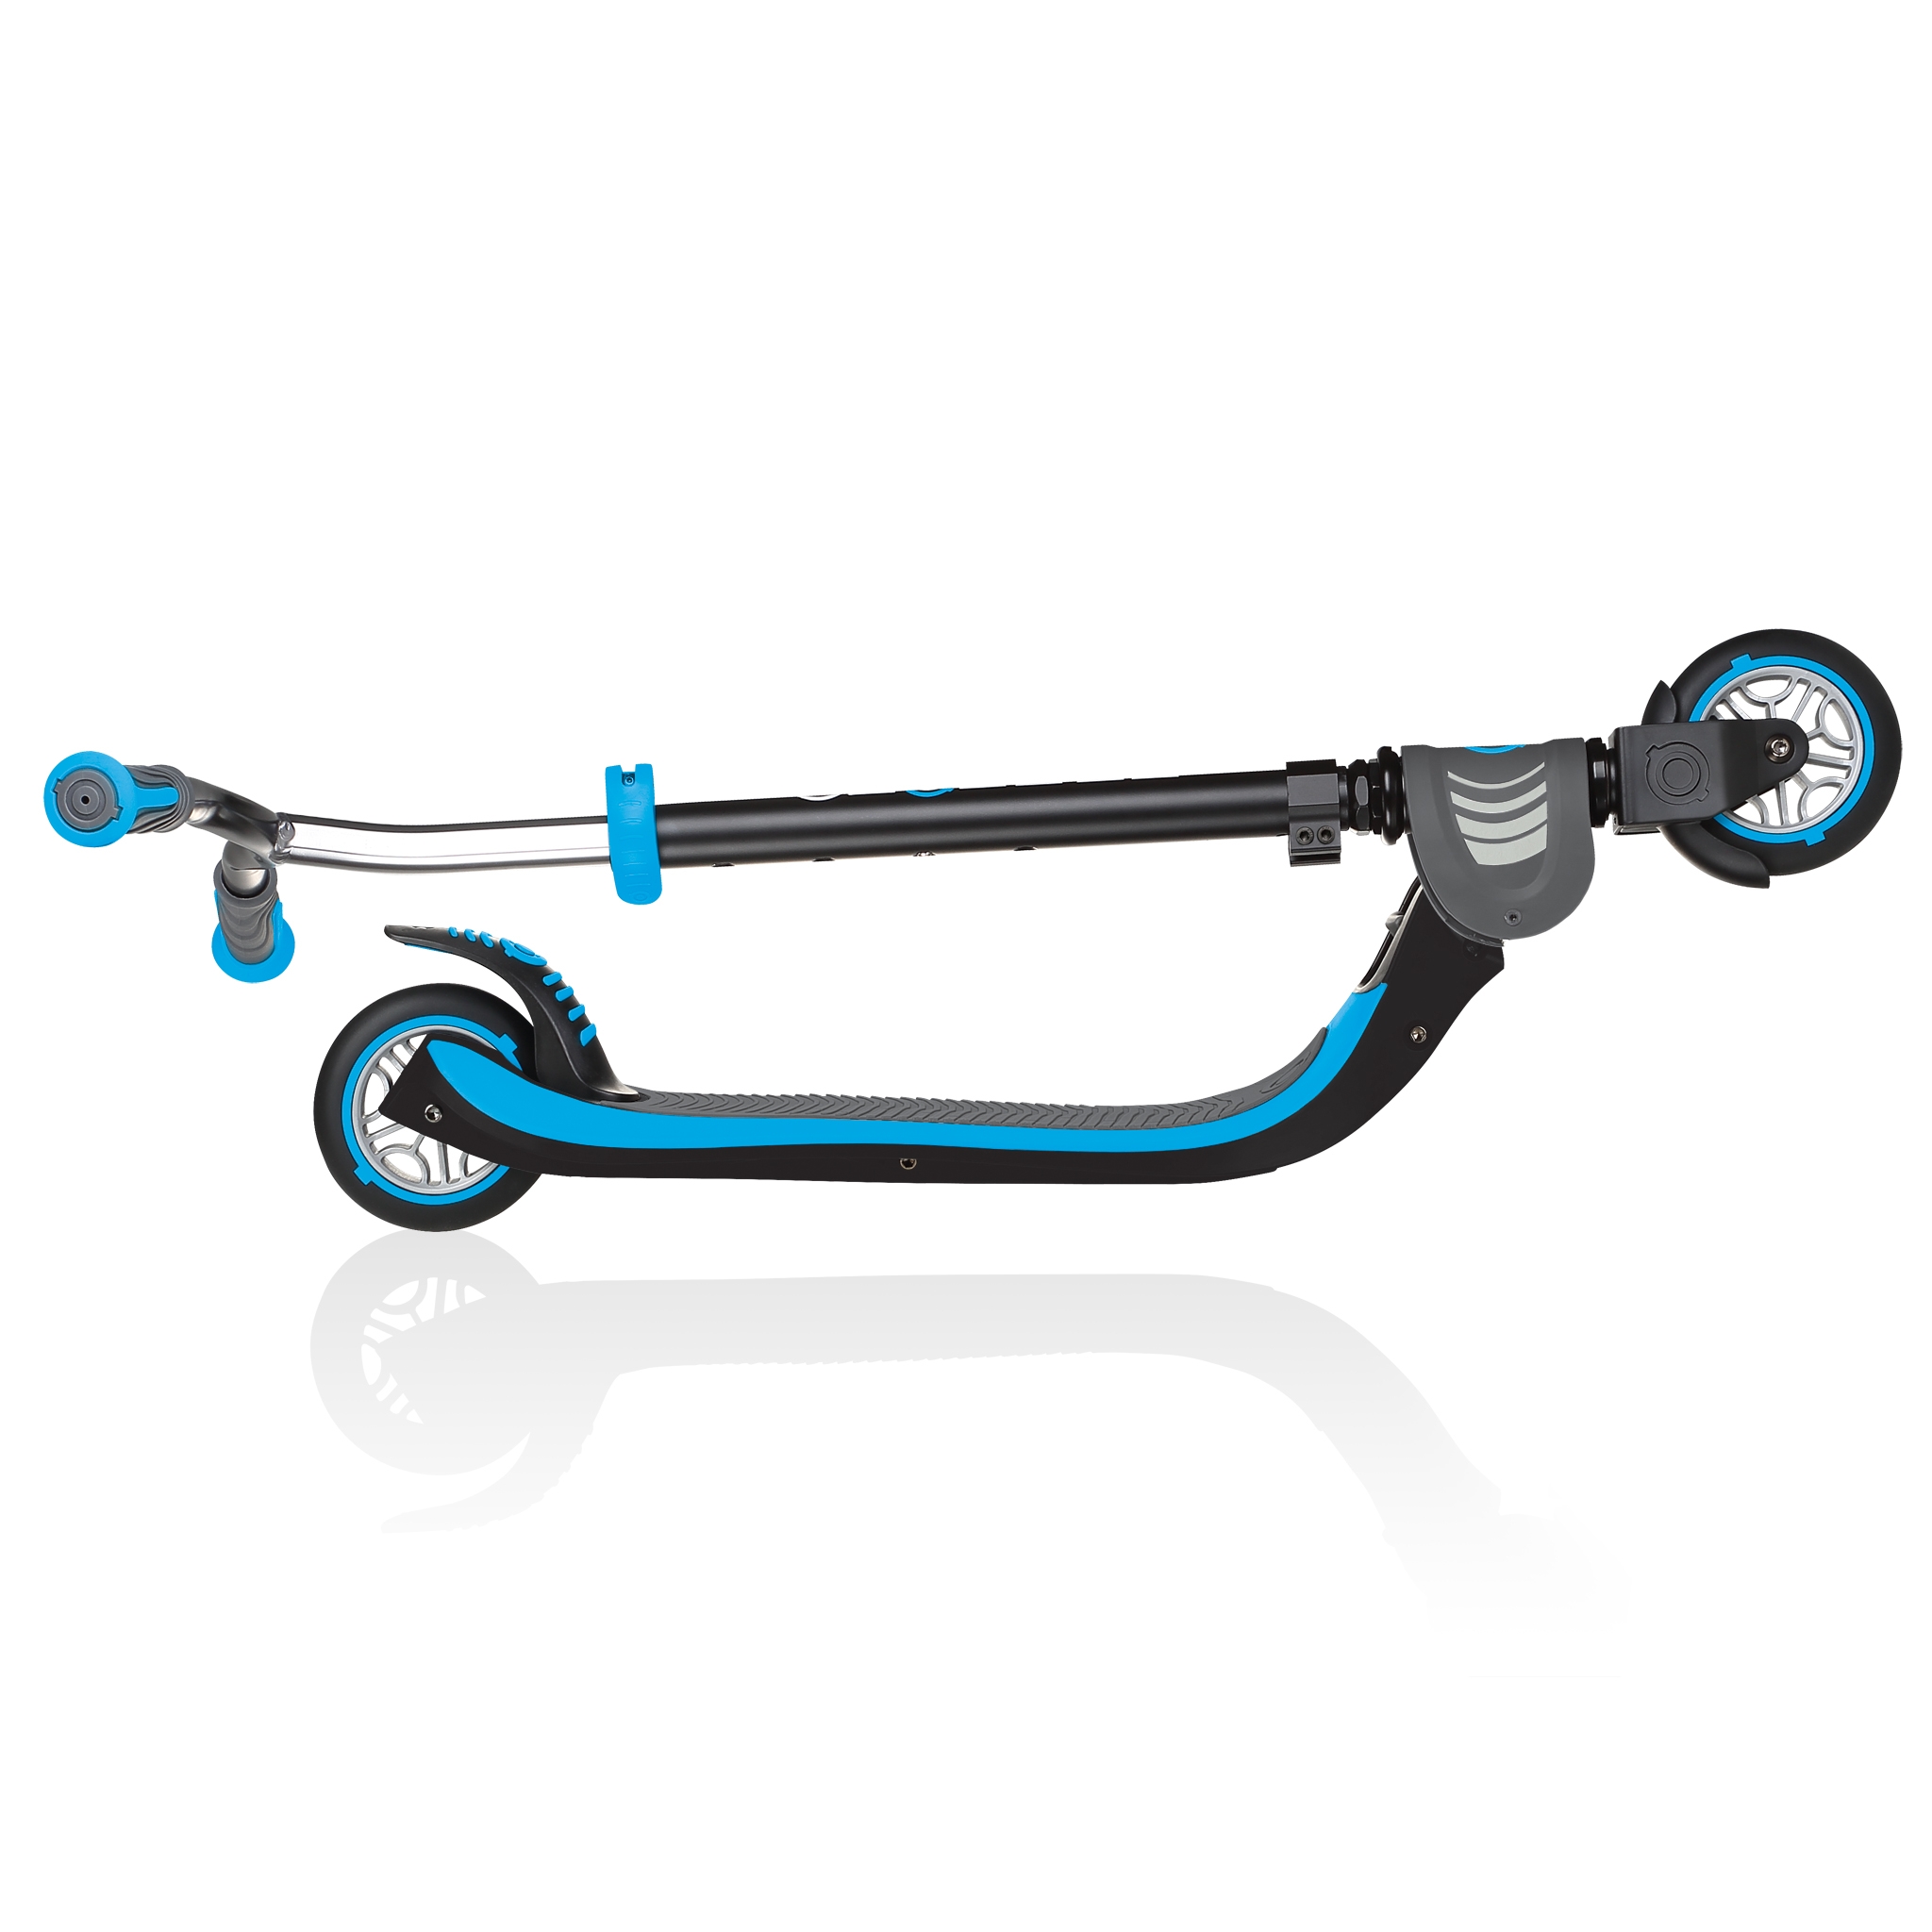 FLOW-FOLDABLE-125-2-wheel-foldable-scooter-for-kids-sky-blue 1